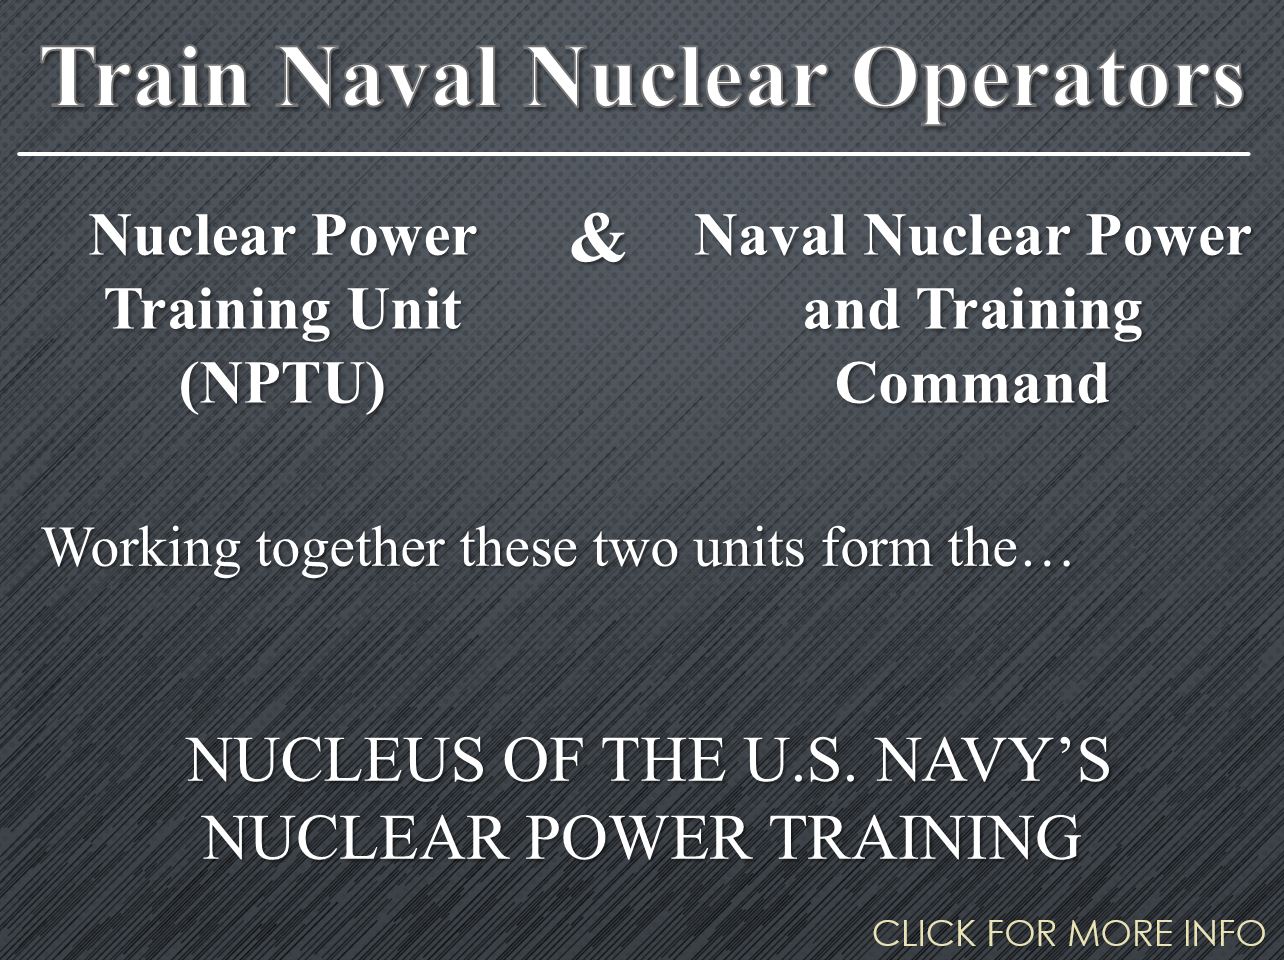 An infographic for Train Naval Nuclear Operators